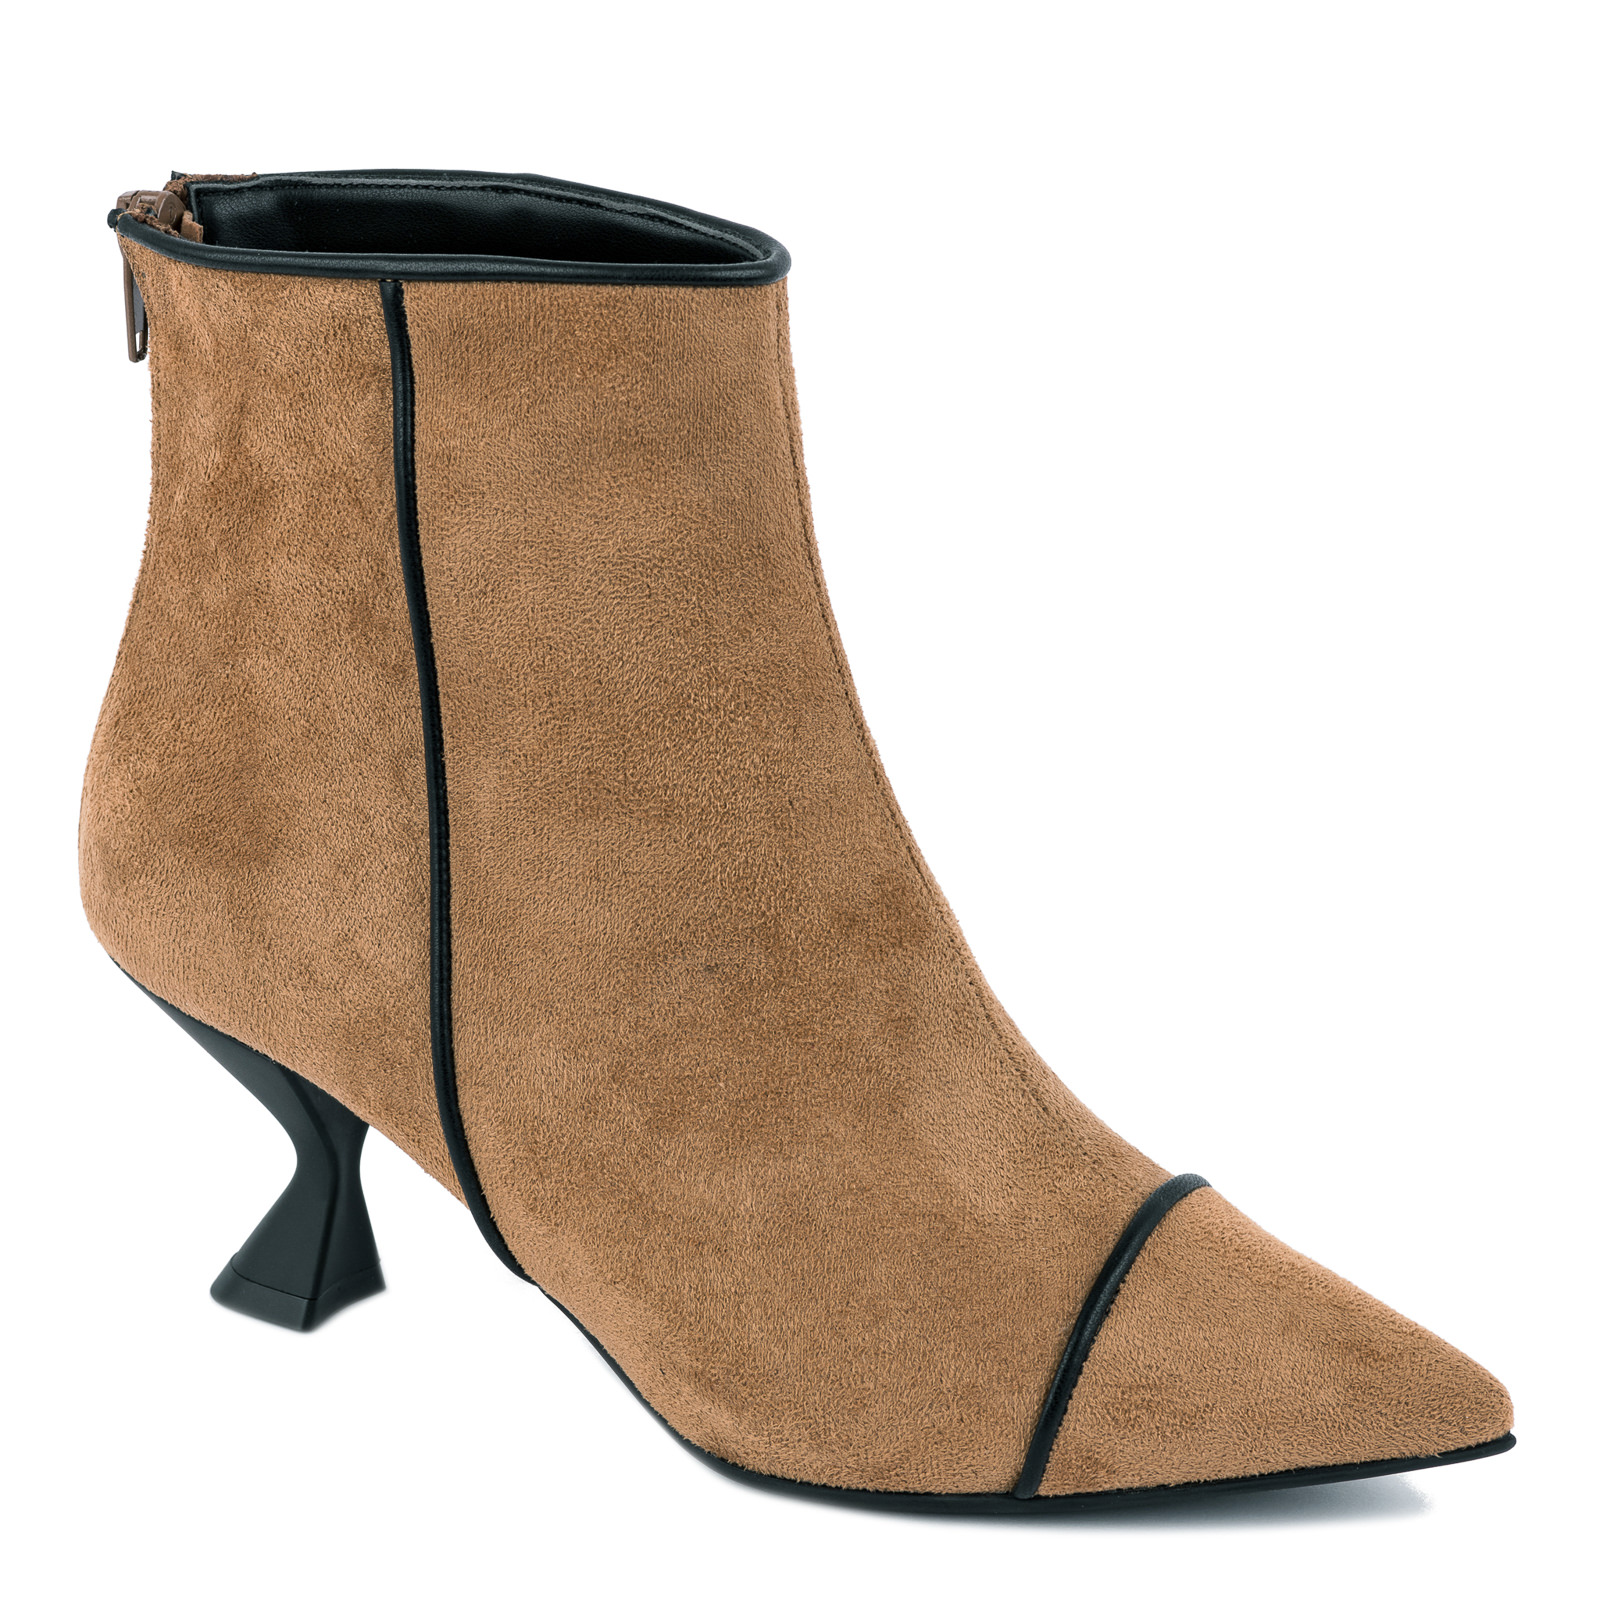 VELOUR POINTED ANKLE BOOTS WITH THIN HEEL - DARK BEIGE